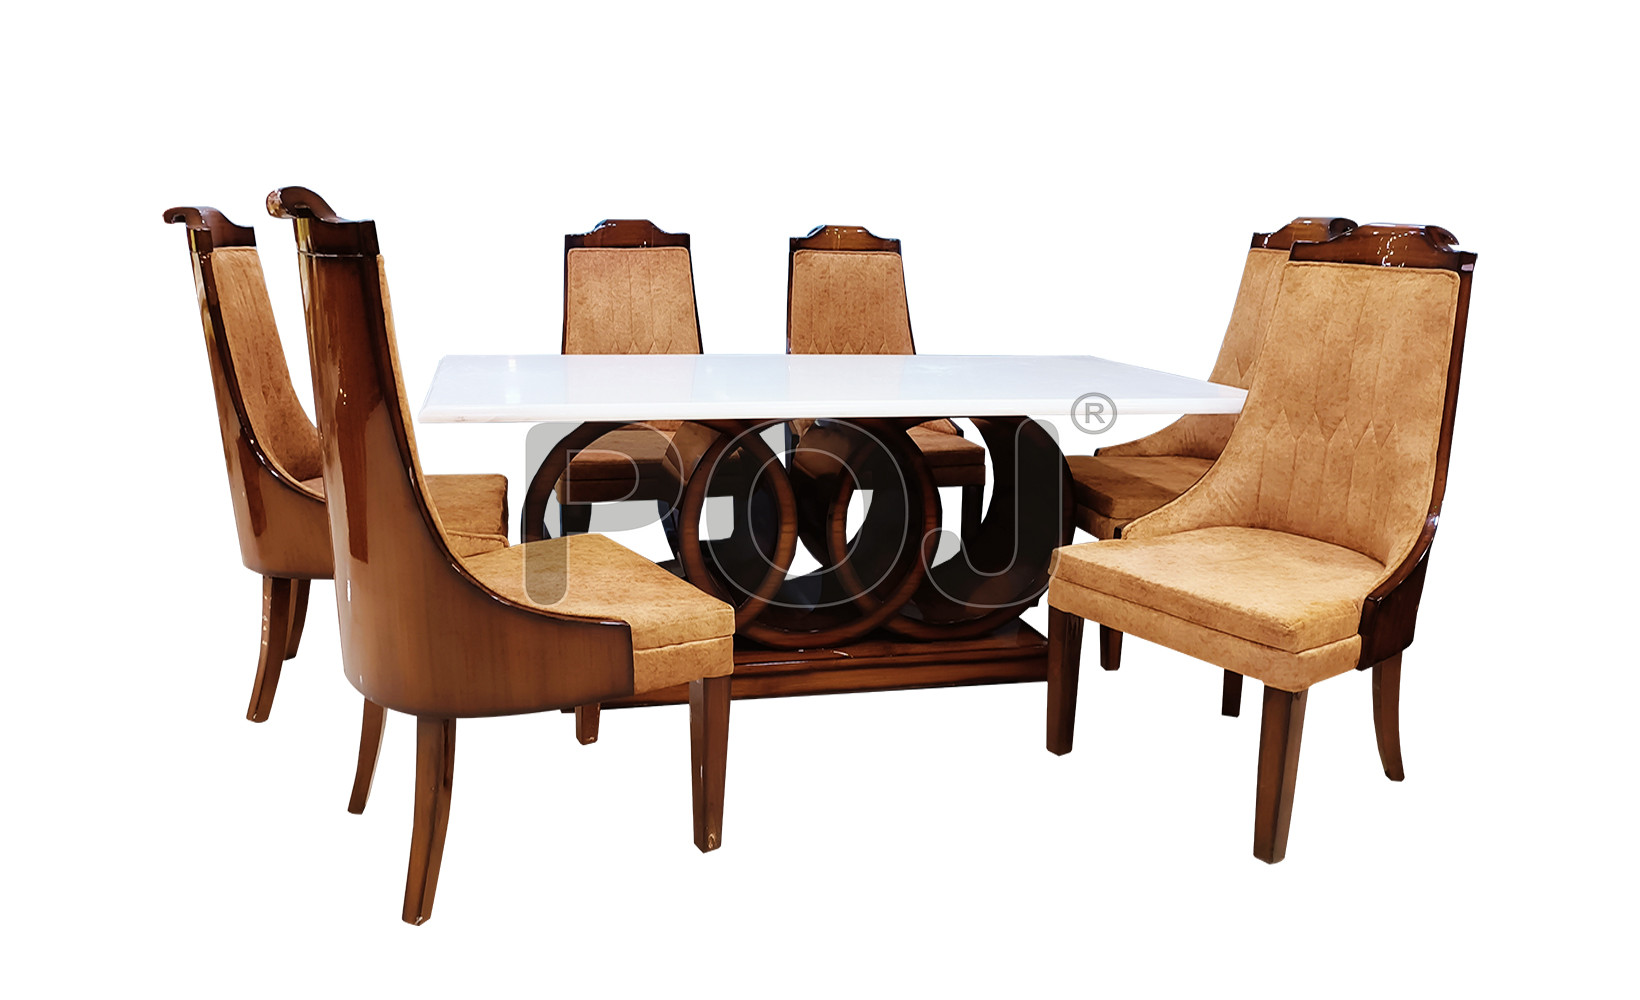 Classic POJ 6 Seater Marble Top Dining Set in Glossy Polish Finish